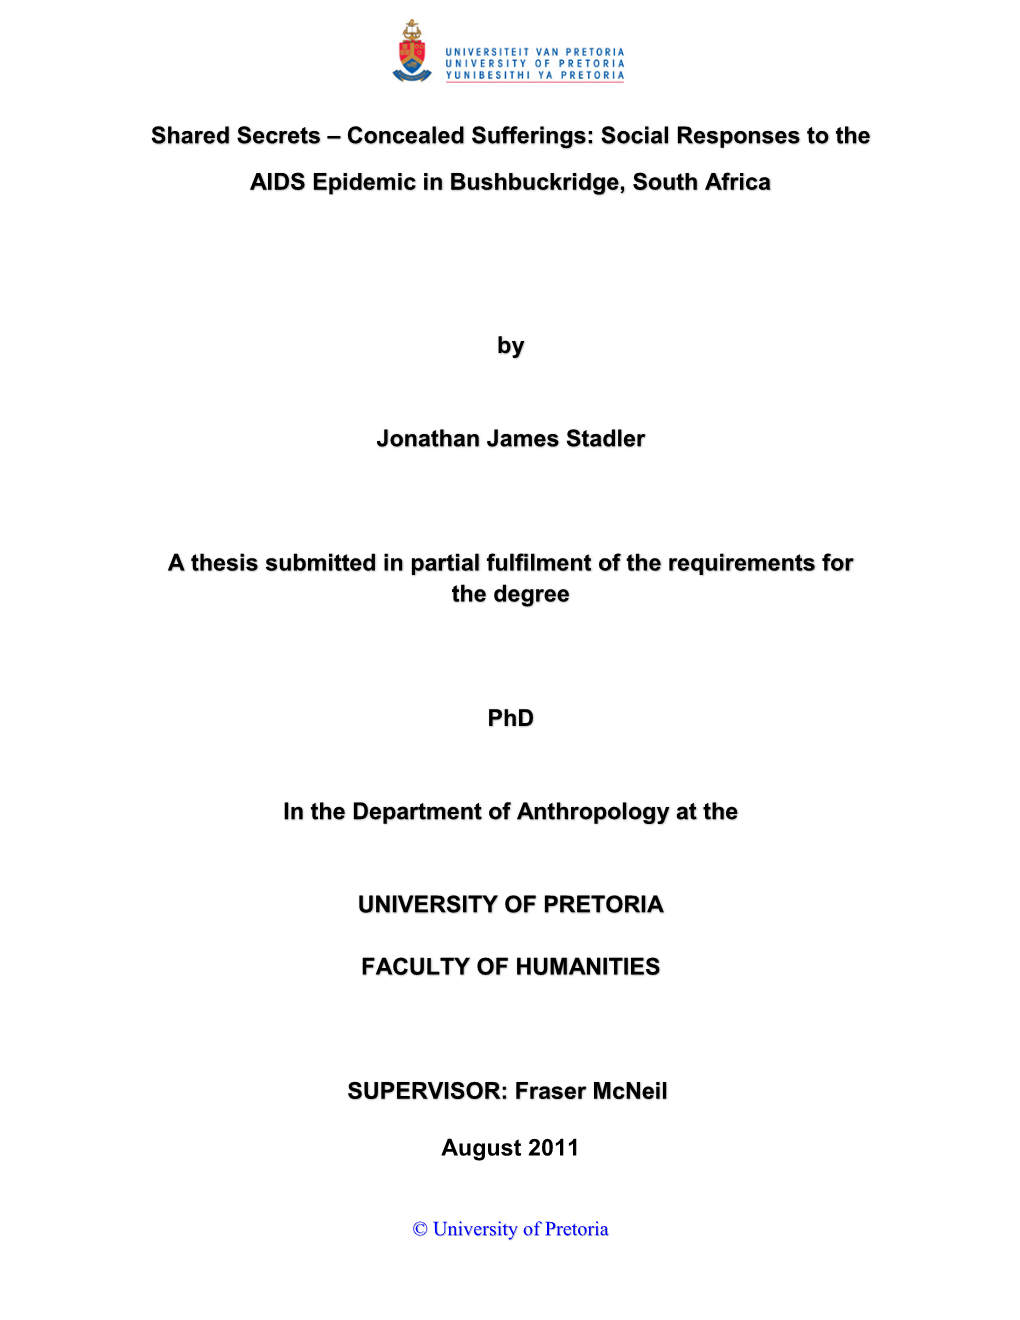 Social Responses to the AIDS Epidemic in Bushbuckridge, South Africa by Jonathan James